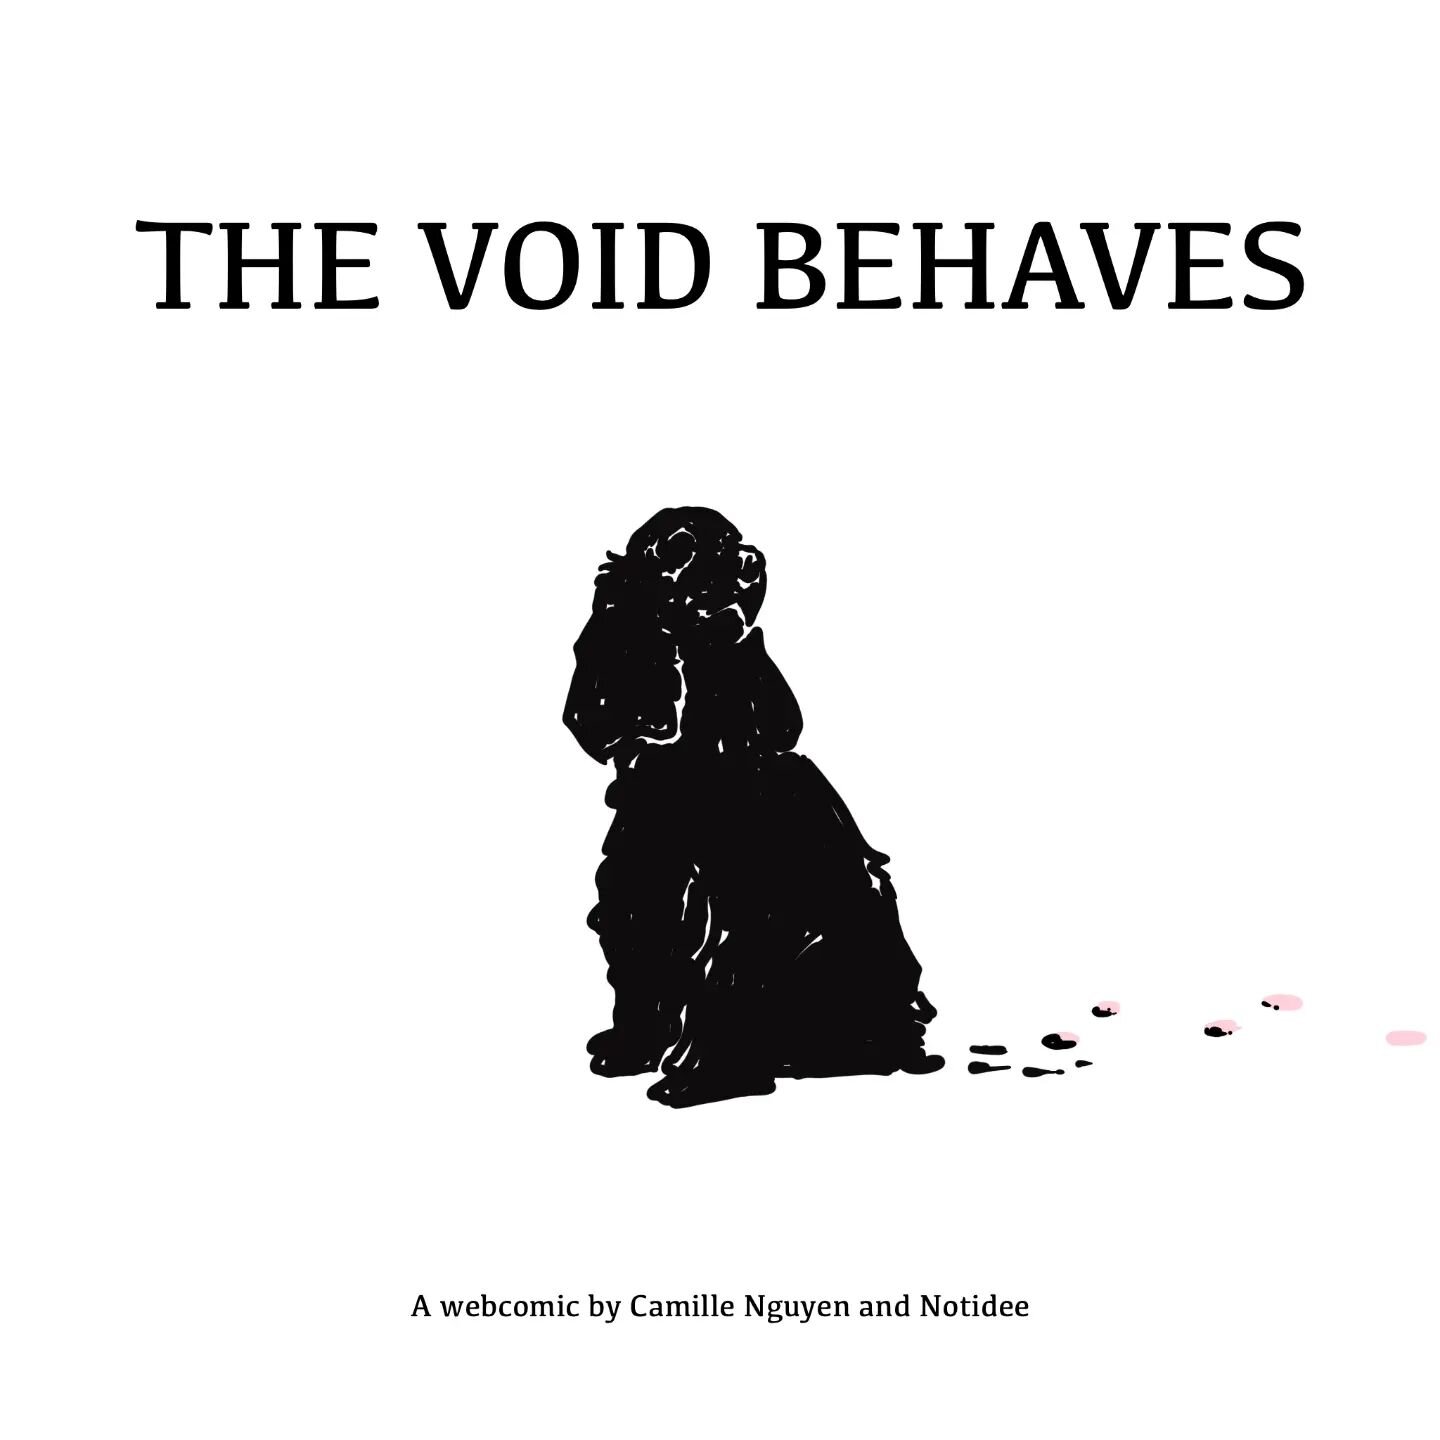 The Void - read the whole webcomic by Camille Nguyen and Notidee in my highlighted stories 🔝

I knew I would miss the good times.

But I didn't anticipate to miss the things that were so annoying to me when you were there.

And that's the thing with